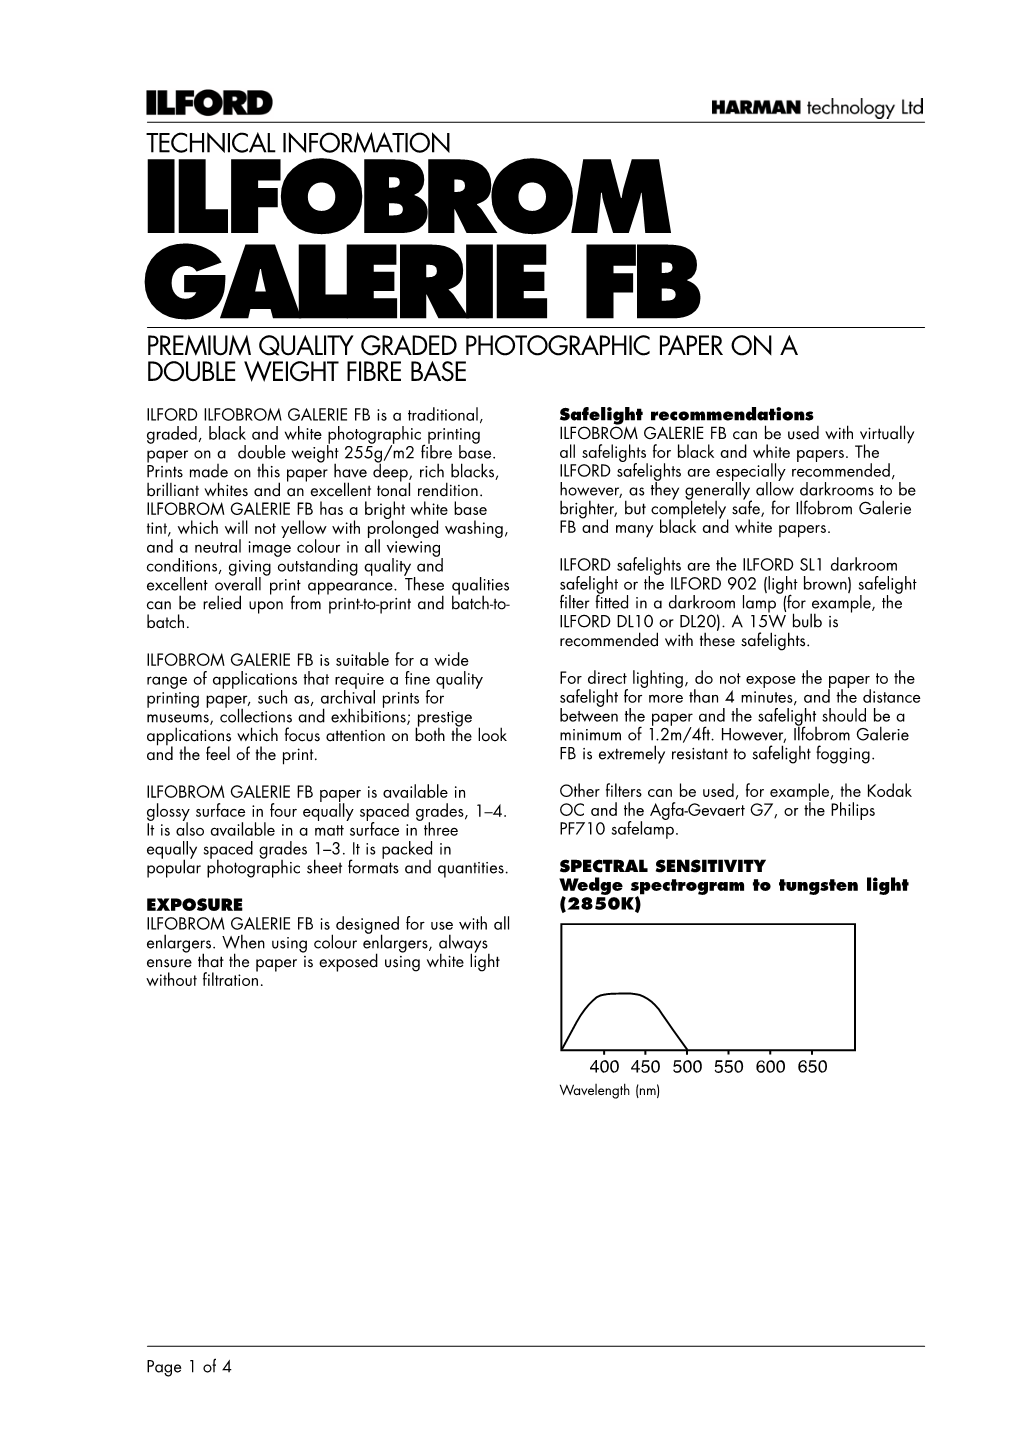 Ilfobrom Galerie Fb Premium Quality Graded Photographic Paper on a Double Weight Fibre Base